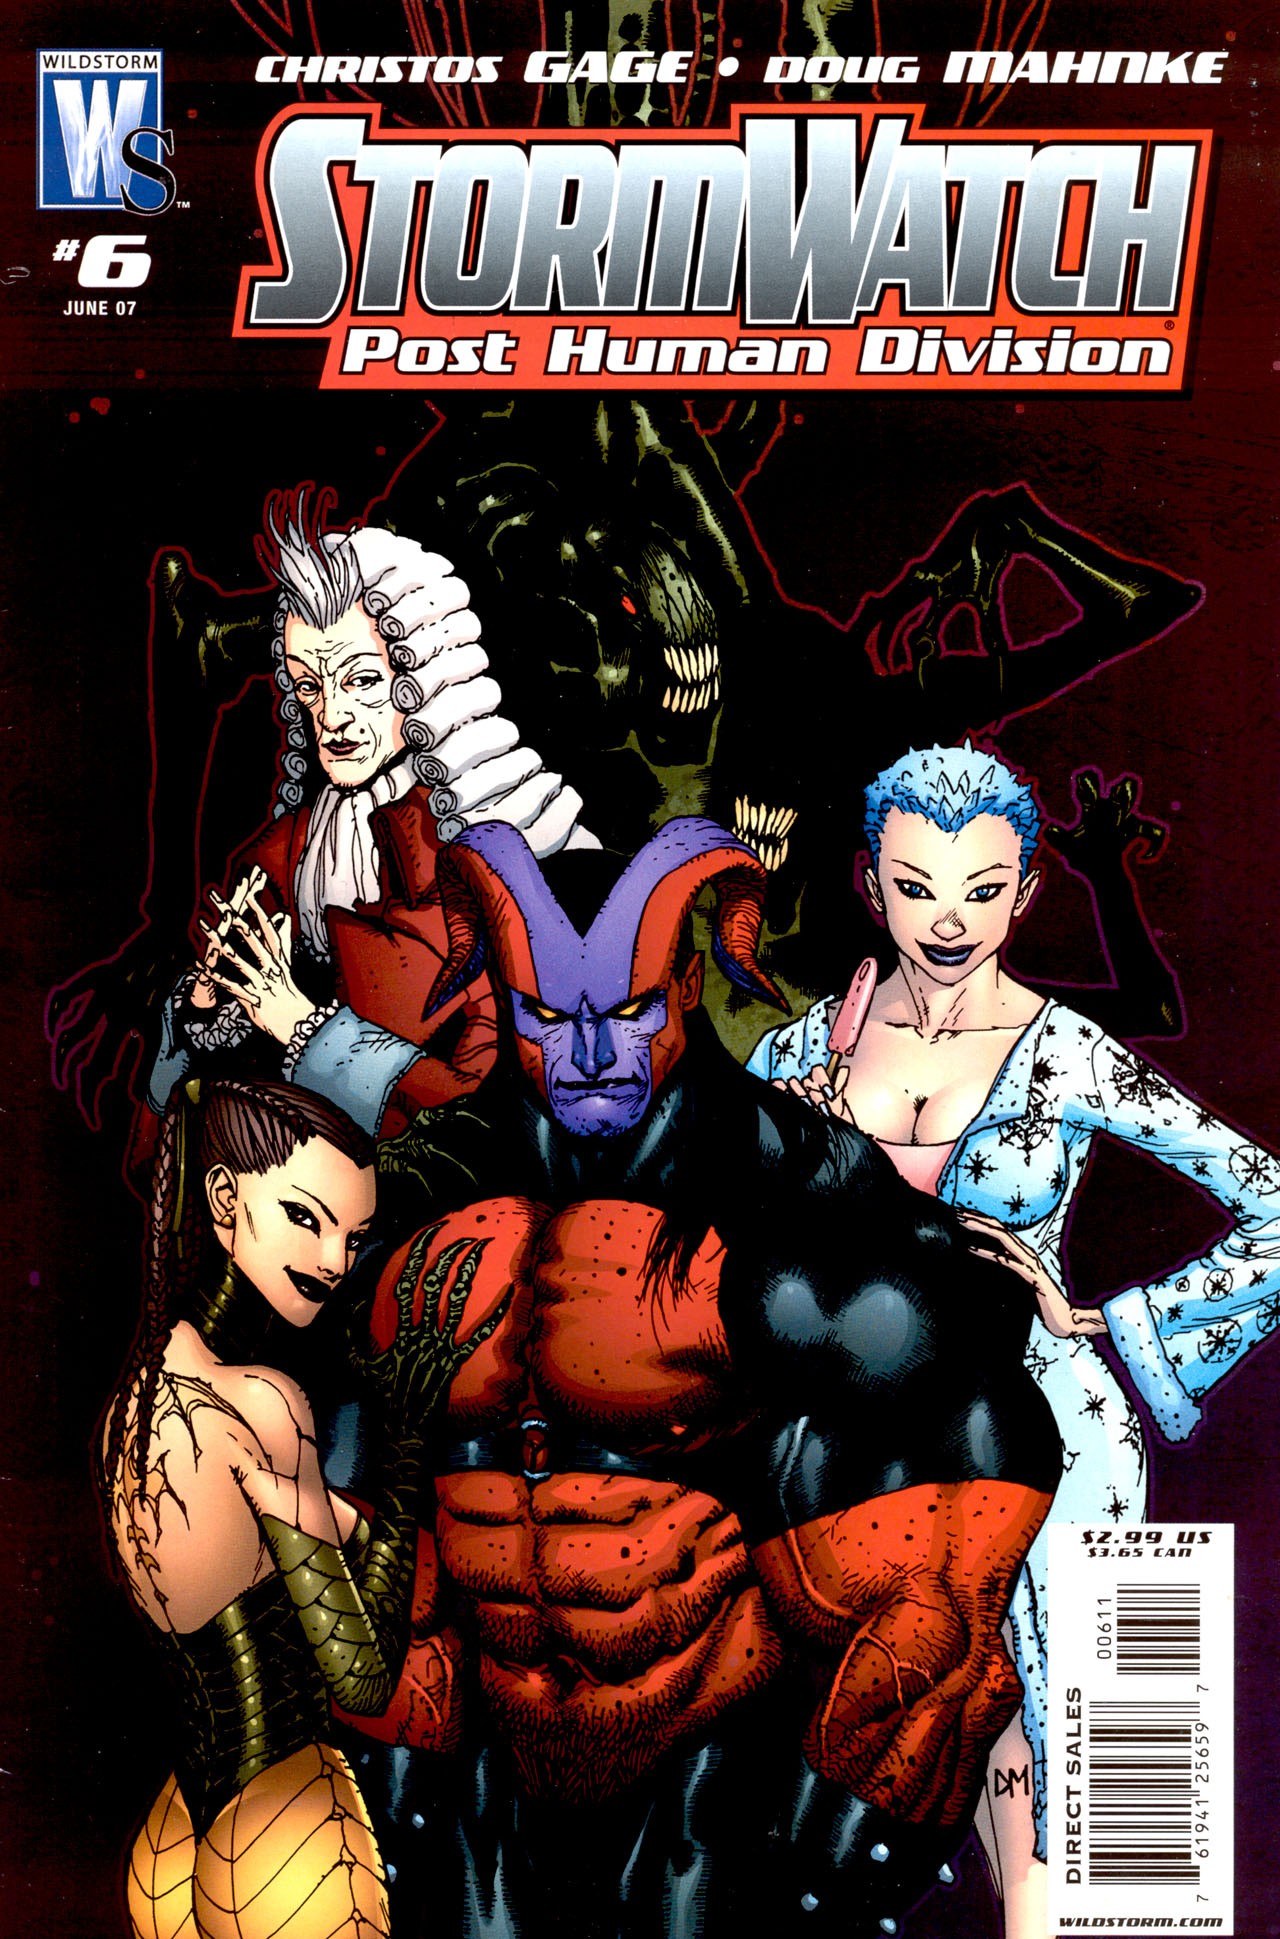 Stormwatch: Post Human Division Vol. 1 #6